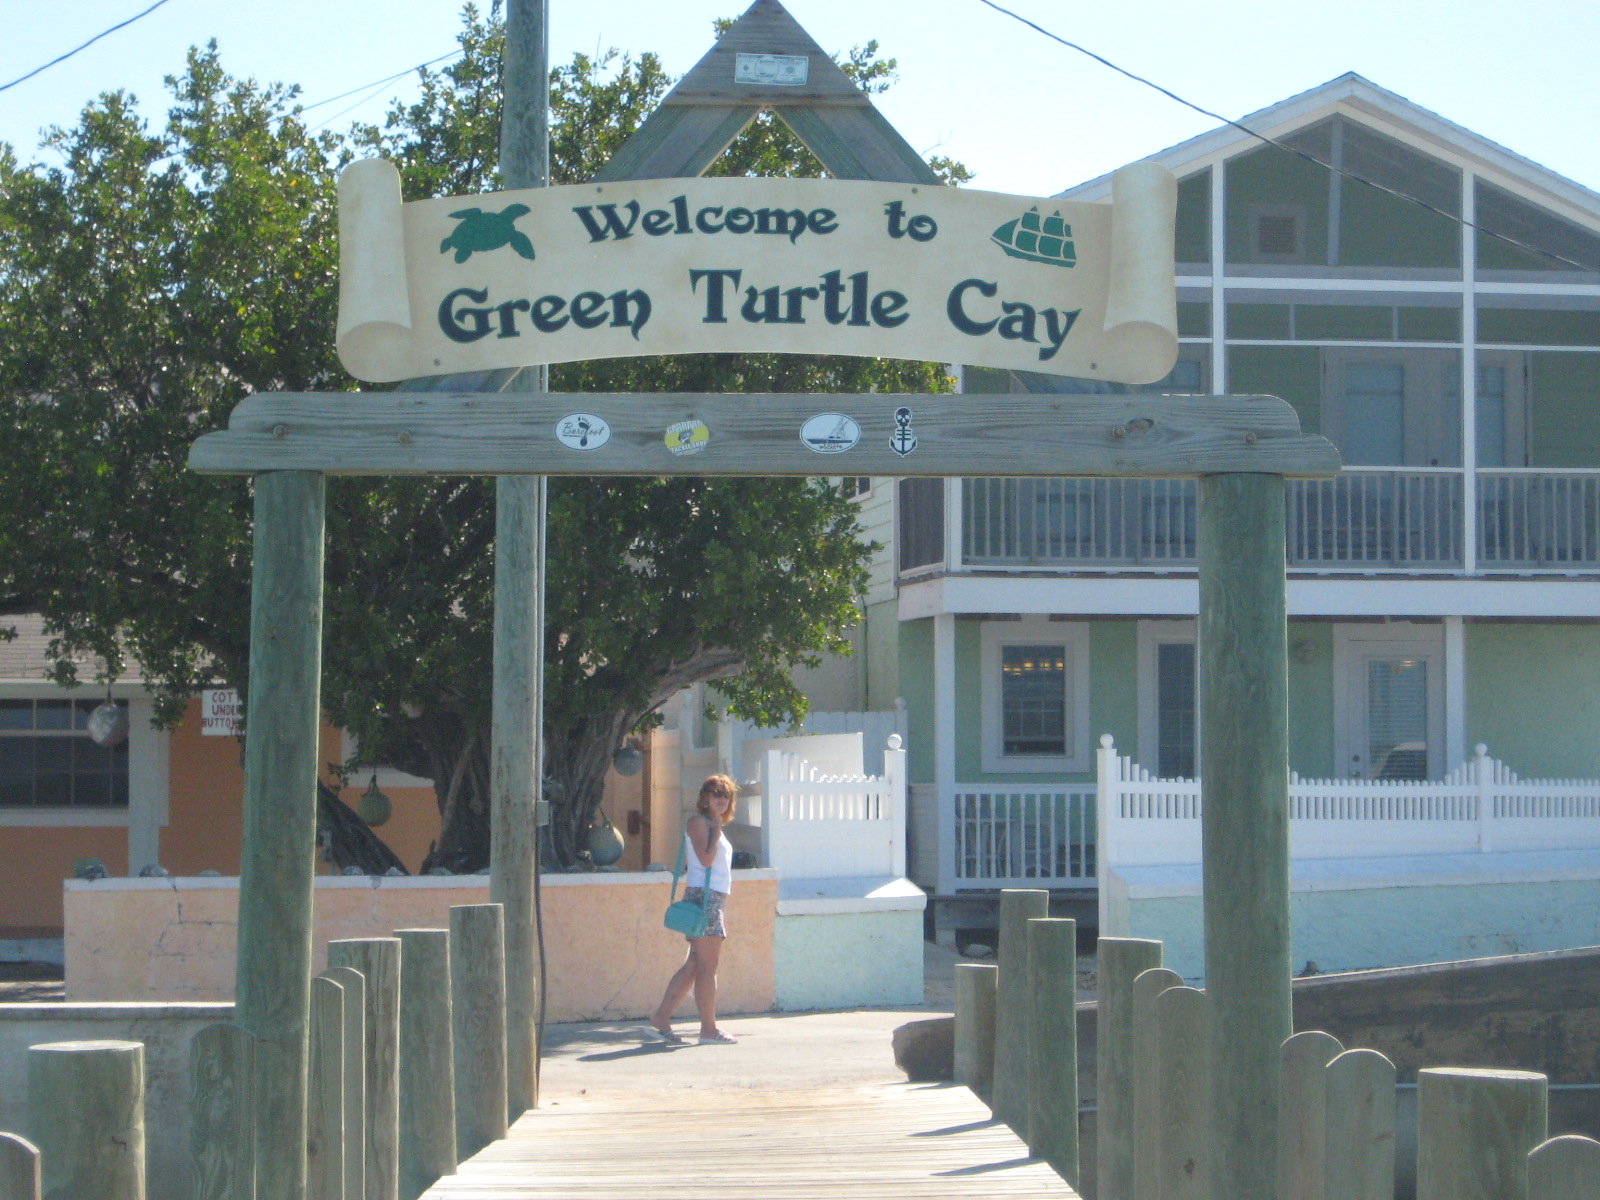 The Welcoming Sign at the Dinghy Dock, New Plymouth is the name of the settlement at Green Turtle.